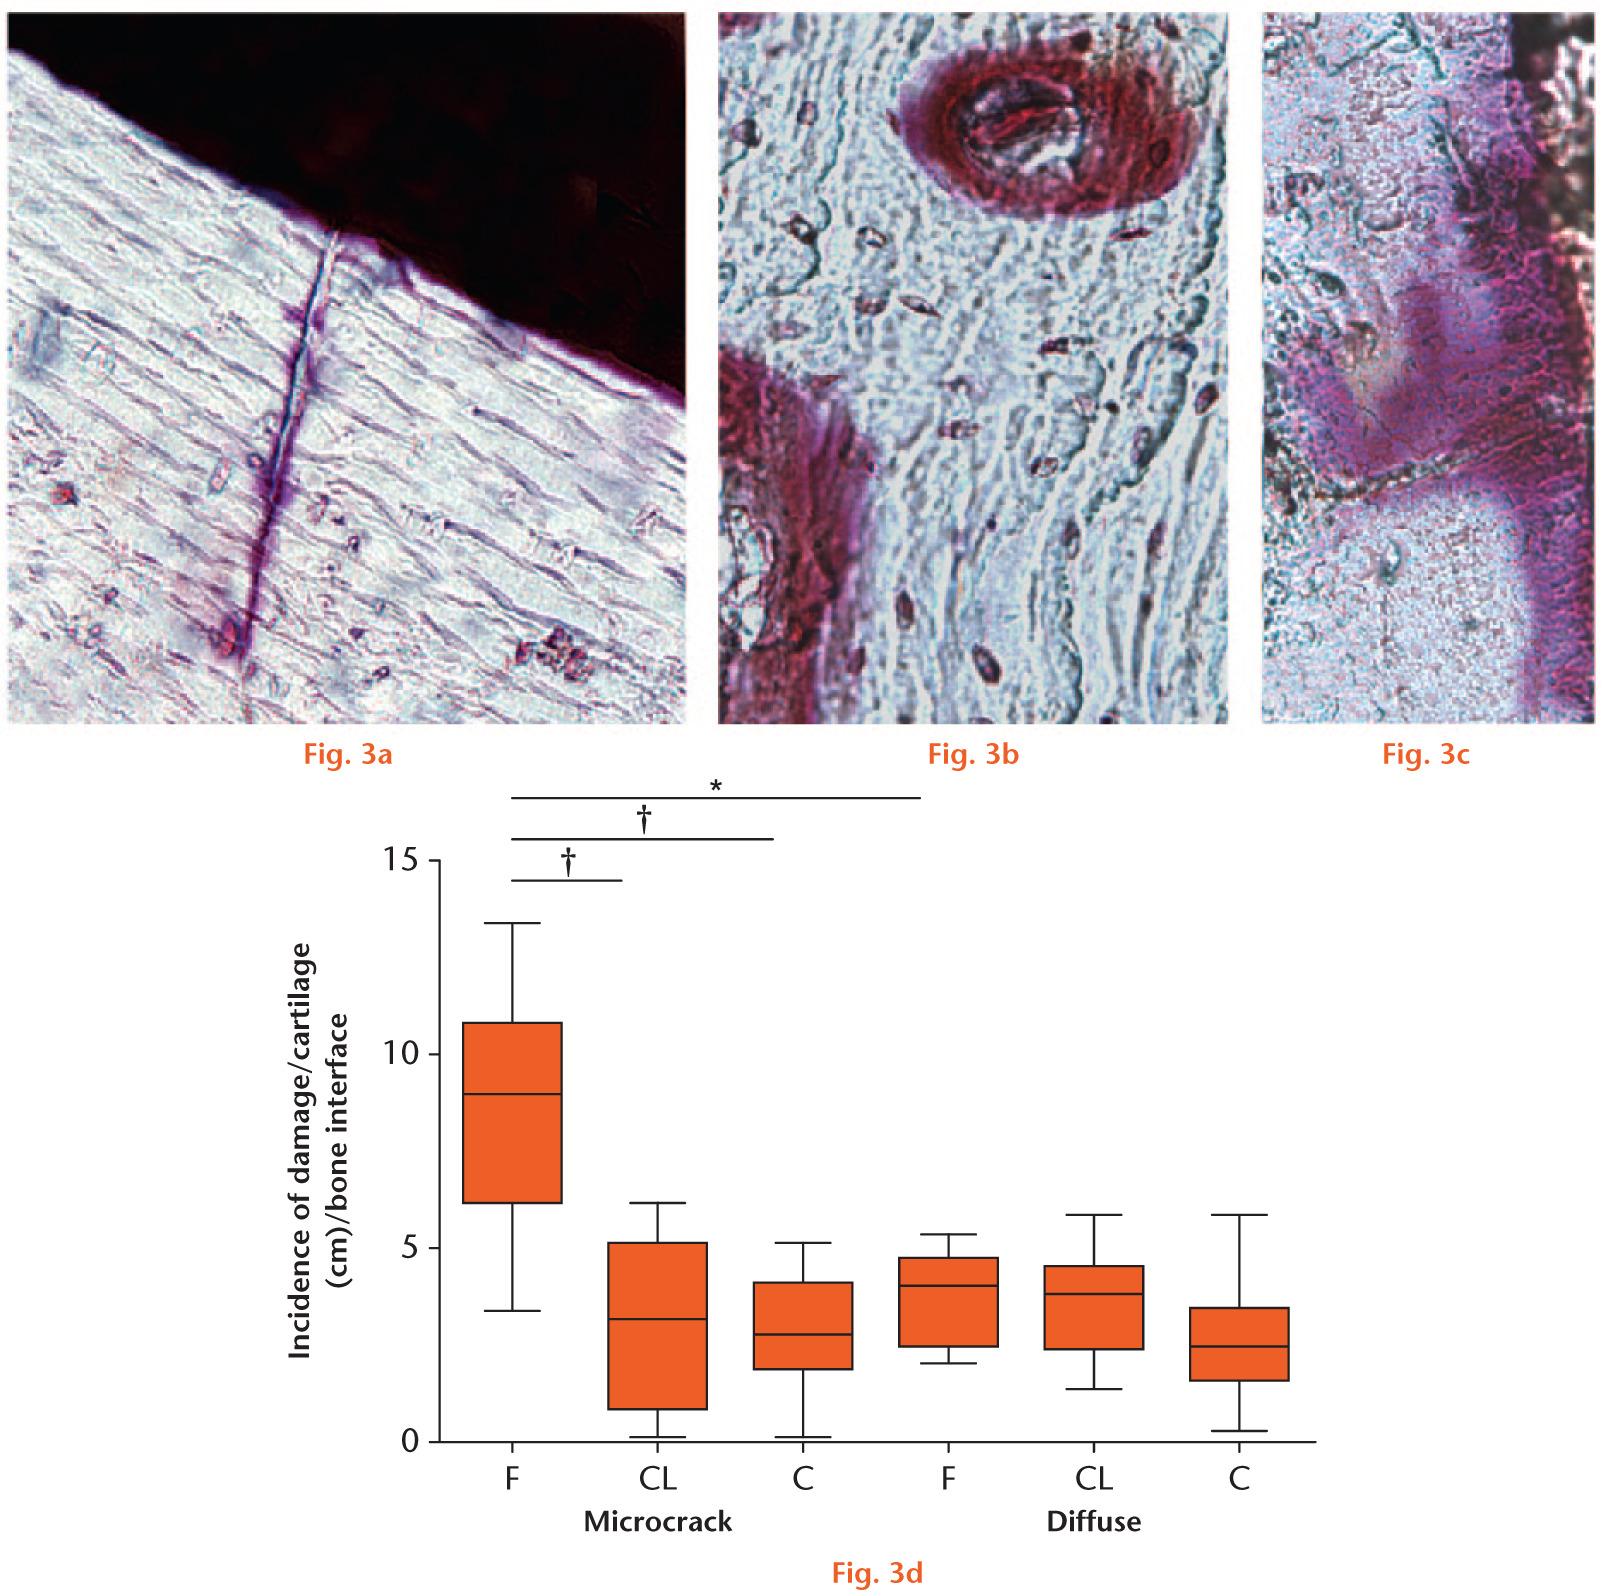  
            Representative micrographs of acid fuchsin-labelled structures in metacarpal bones: a) linear microcrack extending from articular surface; b) staining around blood vessels; and c) diffuse microdamage extending from articular surface. d) Graph showing the amount of damage per surface area of section for microcracks and diffuse damage. There was no difference in the amount of diffuse damage quantified in the three groups; however, there was a statistically significant difference between the amount of microcrack damage/surface area in the lateral condyle (site D, Figure 2) compared with both contralateral and control bones. Scale bar 100 μm. F, fractured bones; Cl, contralateral bones; C, control bones. *p ≤ 0.5; †p ≤ 0.005.
          